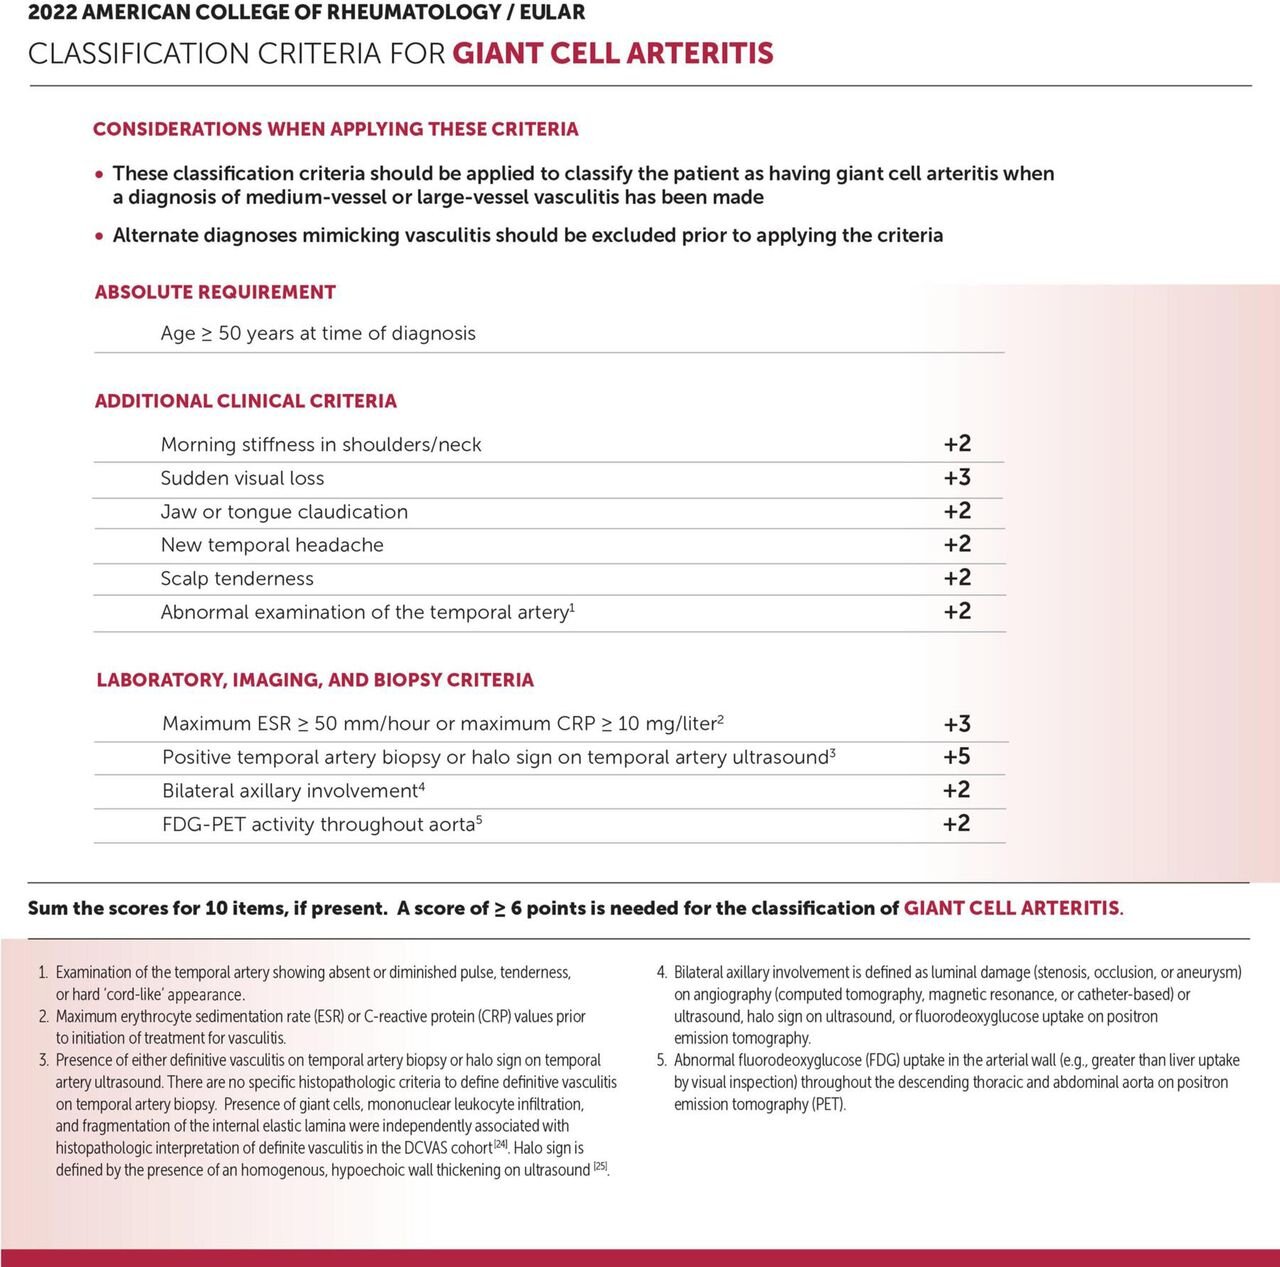 updated-giant-cell-arteritis-classification-criteria